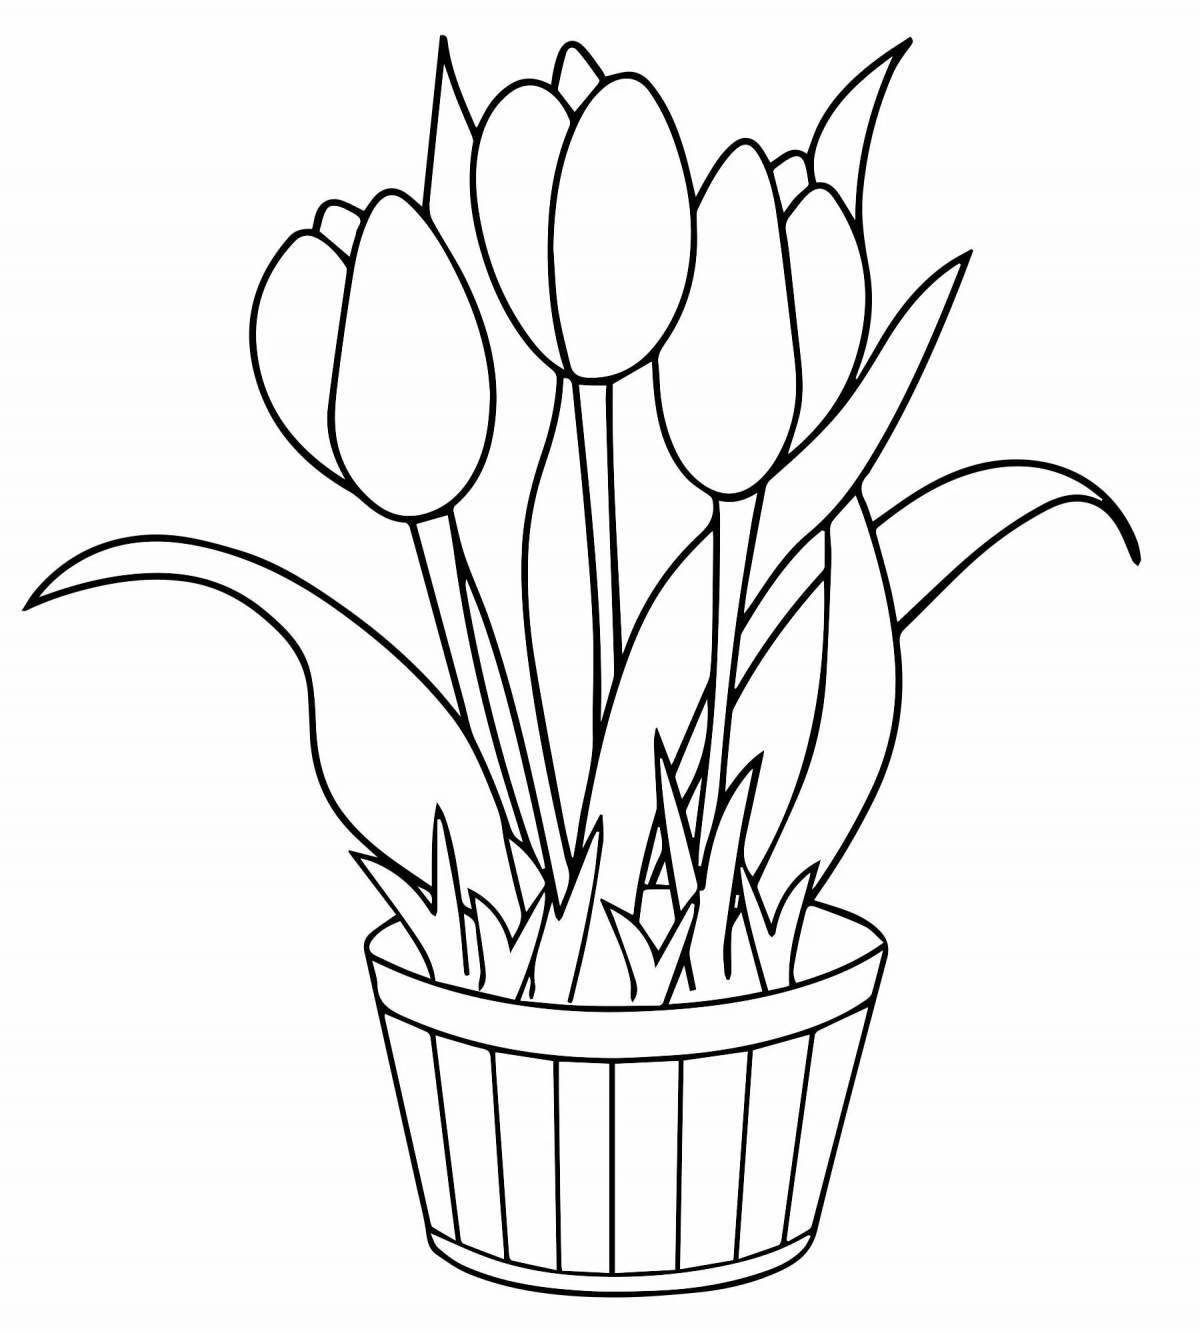 Bright tulips March 8 coloring pages